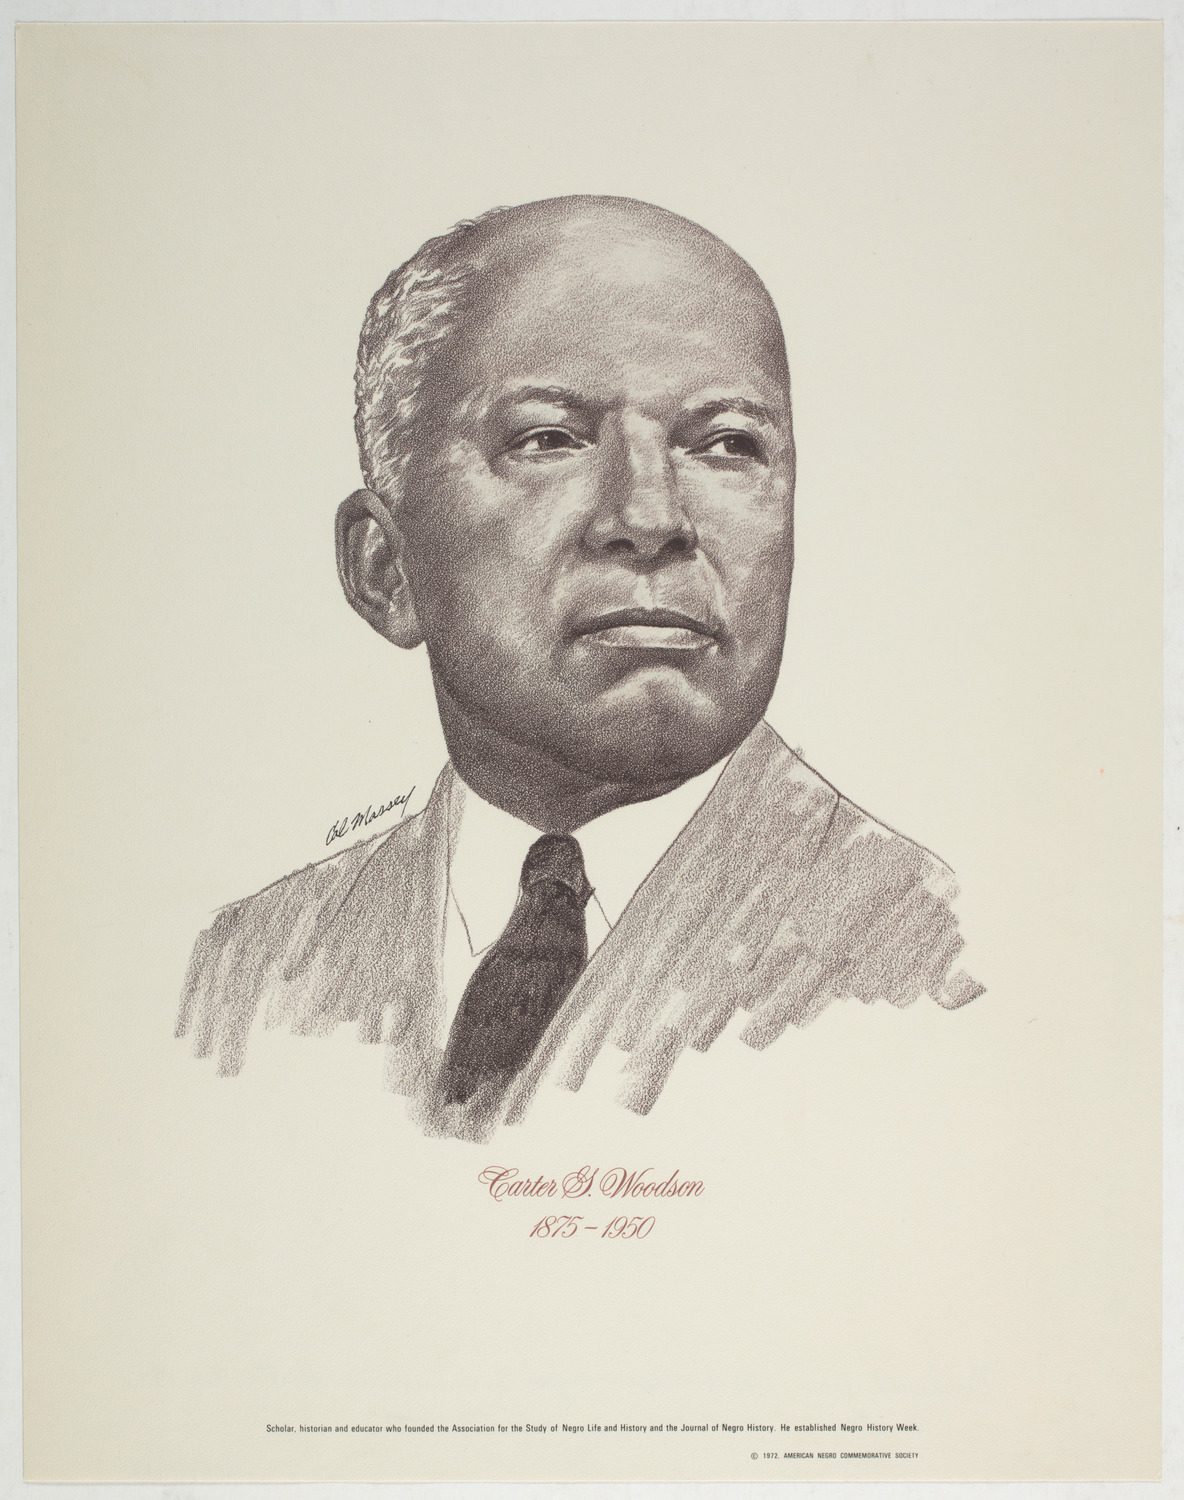 Portrait drawing of Carter G. Woodson